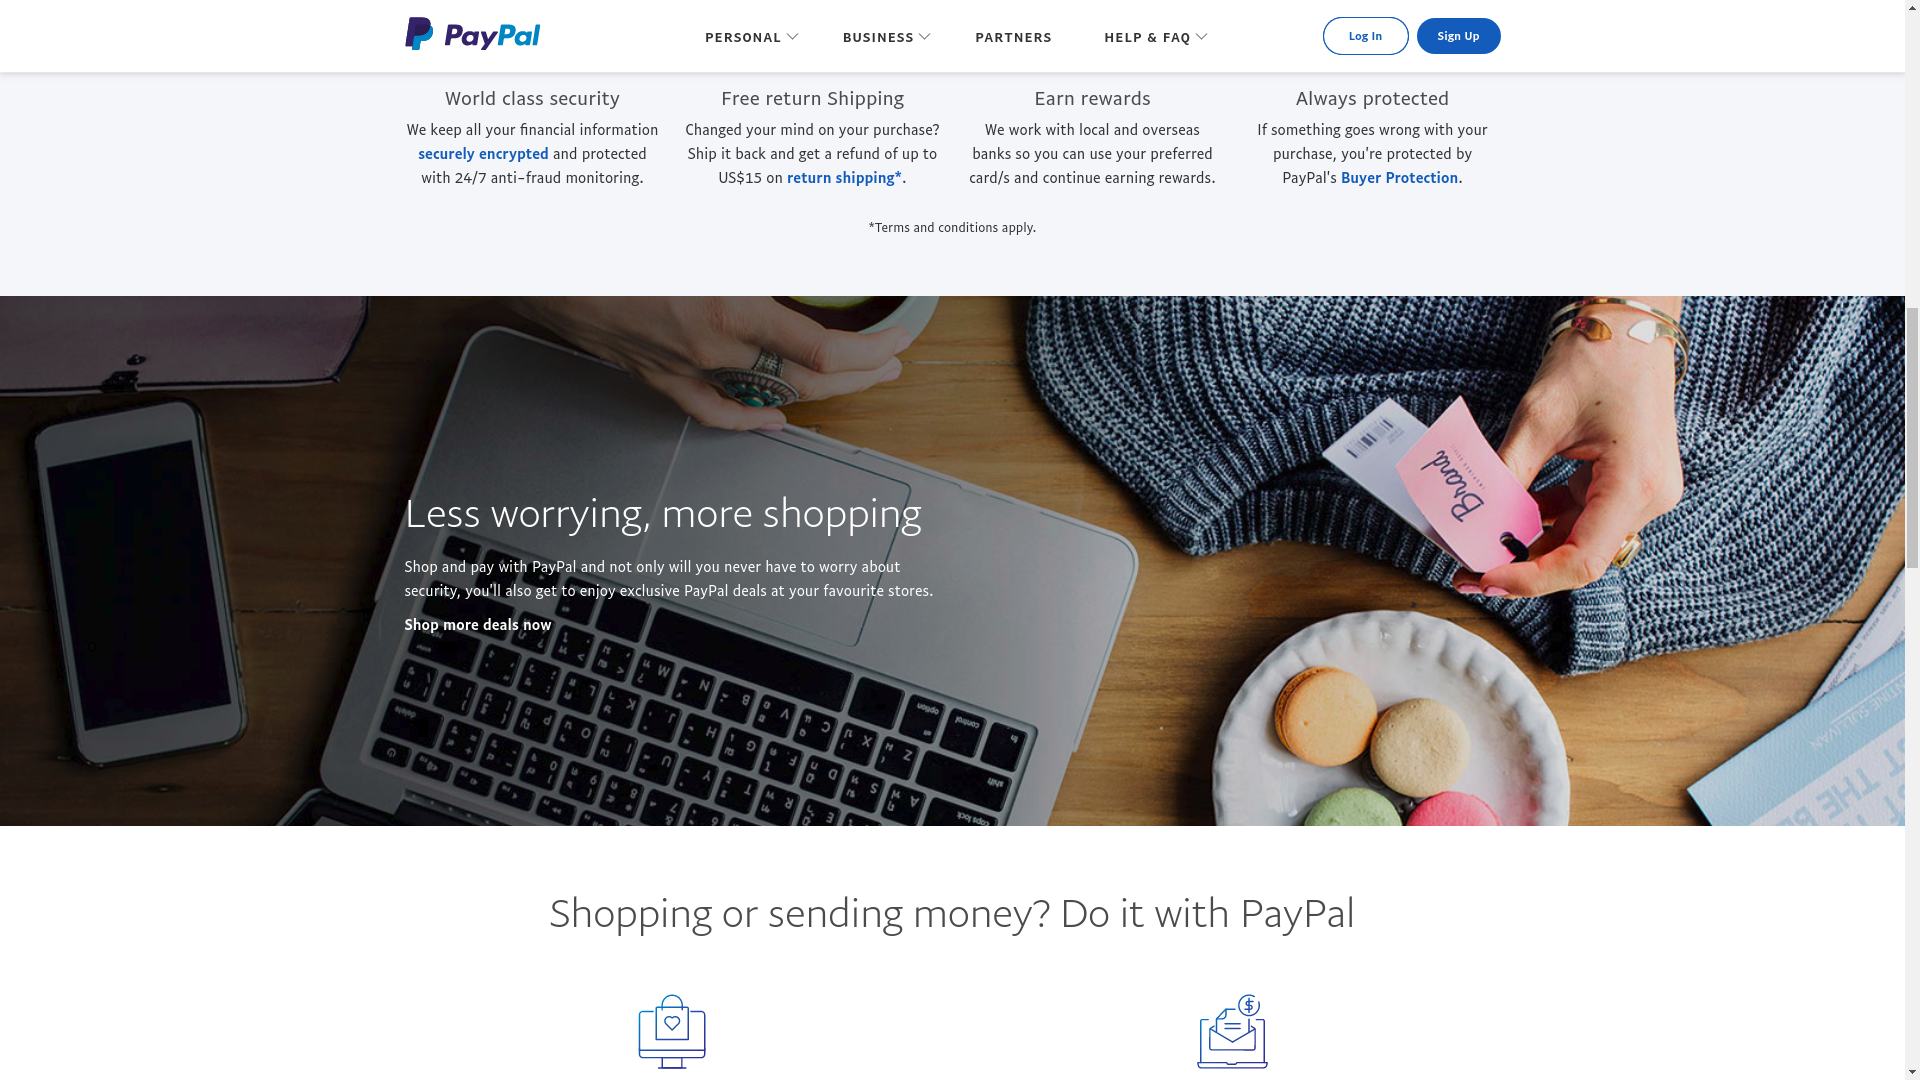 Paypal Integration Paypal Express Checkout Integration Using Omnipay Paypal Php Library With Laravel